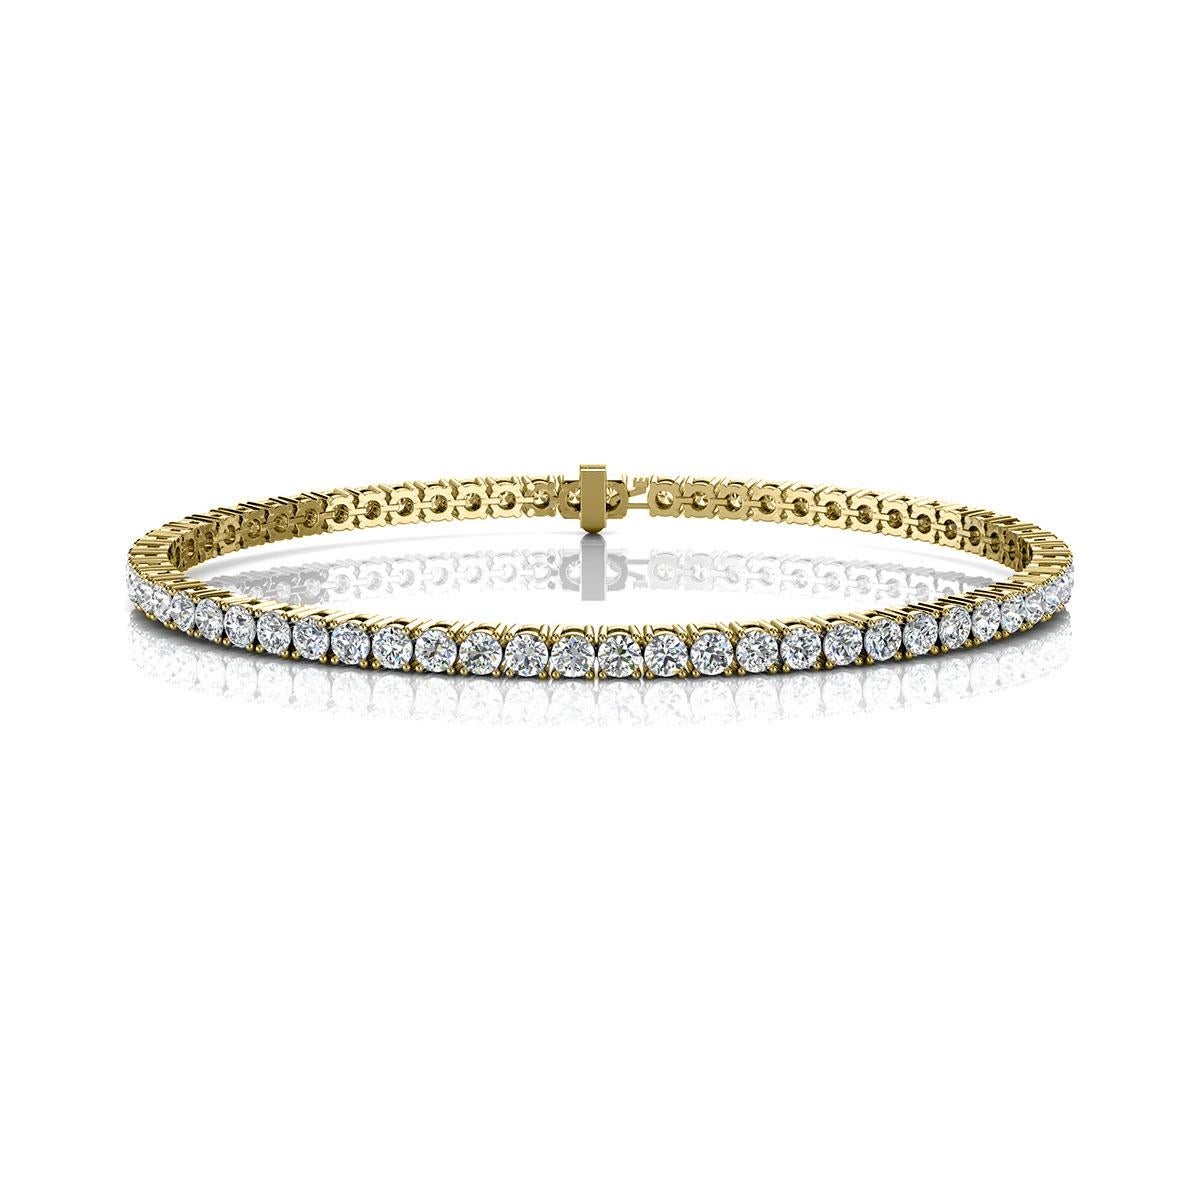 A timeless four prongs diamonds tennis bracelet. Experience the Difference!

Product details: 

Center Gemstone Type: NATURAL DIAMOND
Center Gemstone Color: WHITE
Center Gemstone Shape: ROUND
Center Diamond Carat Weight: 3
Metal: 14K Yellow